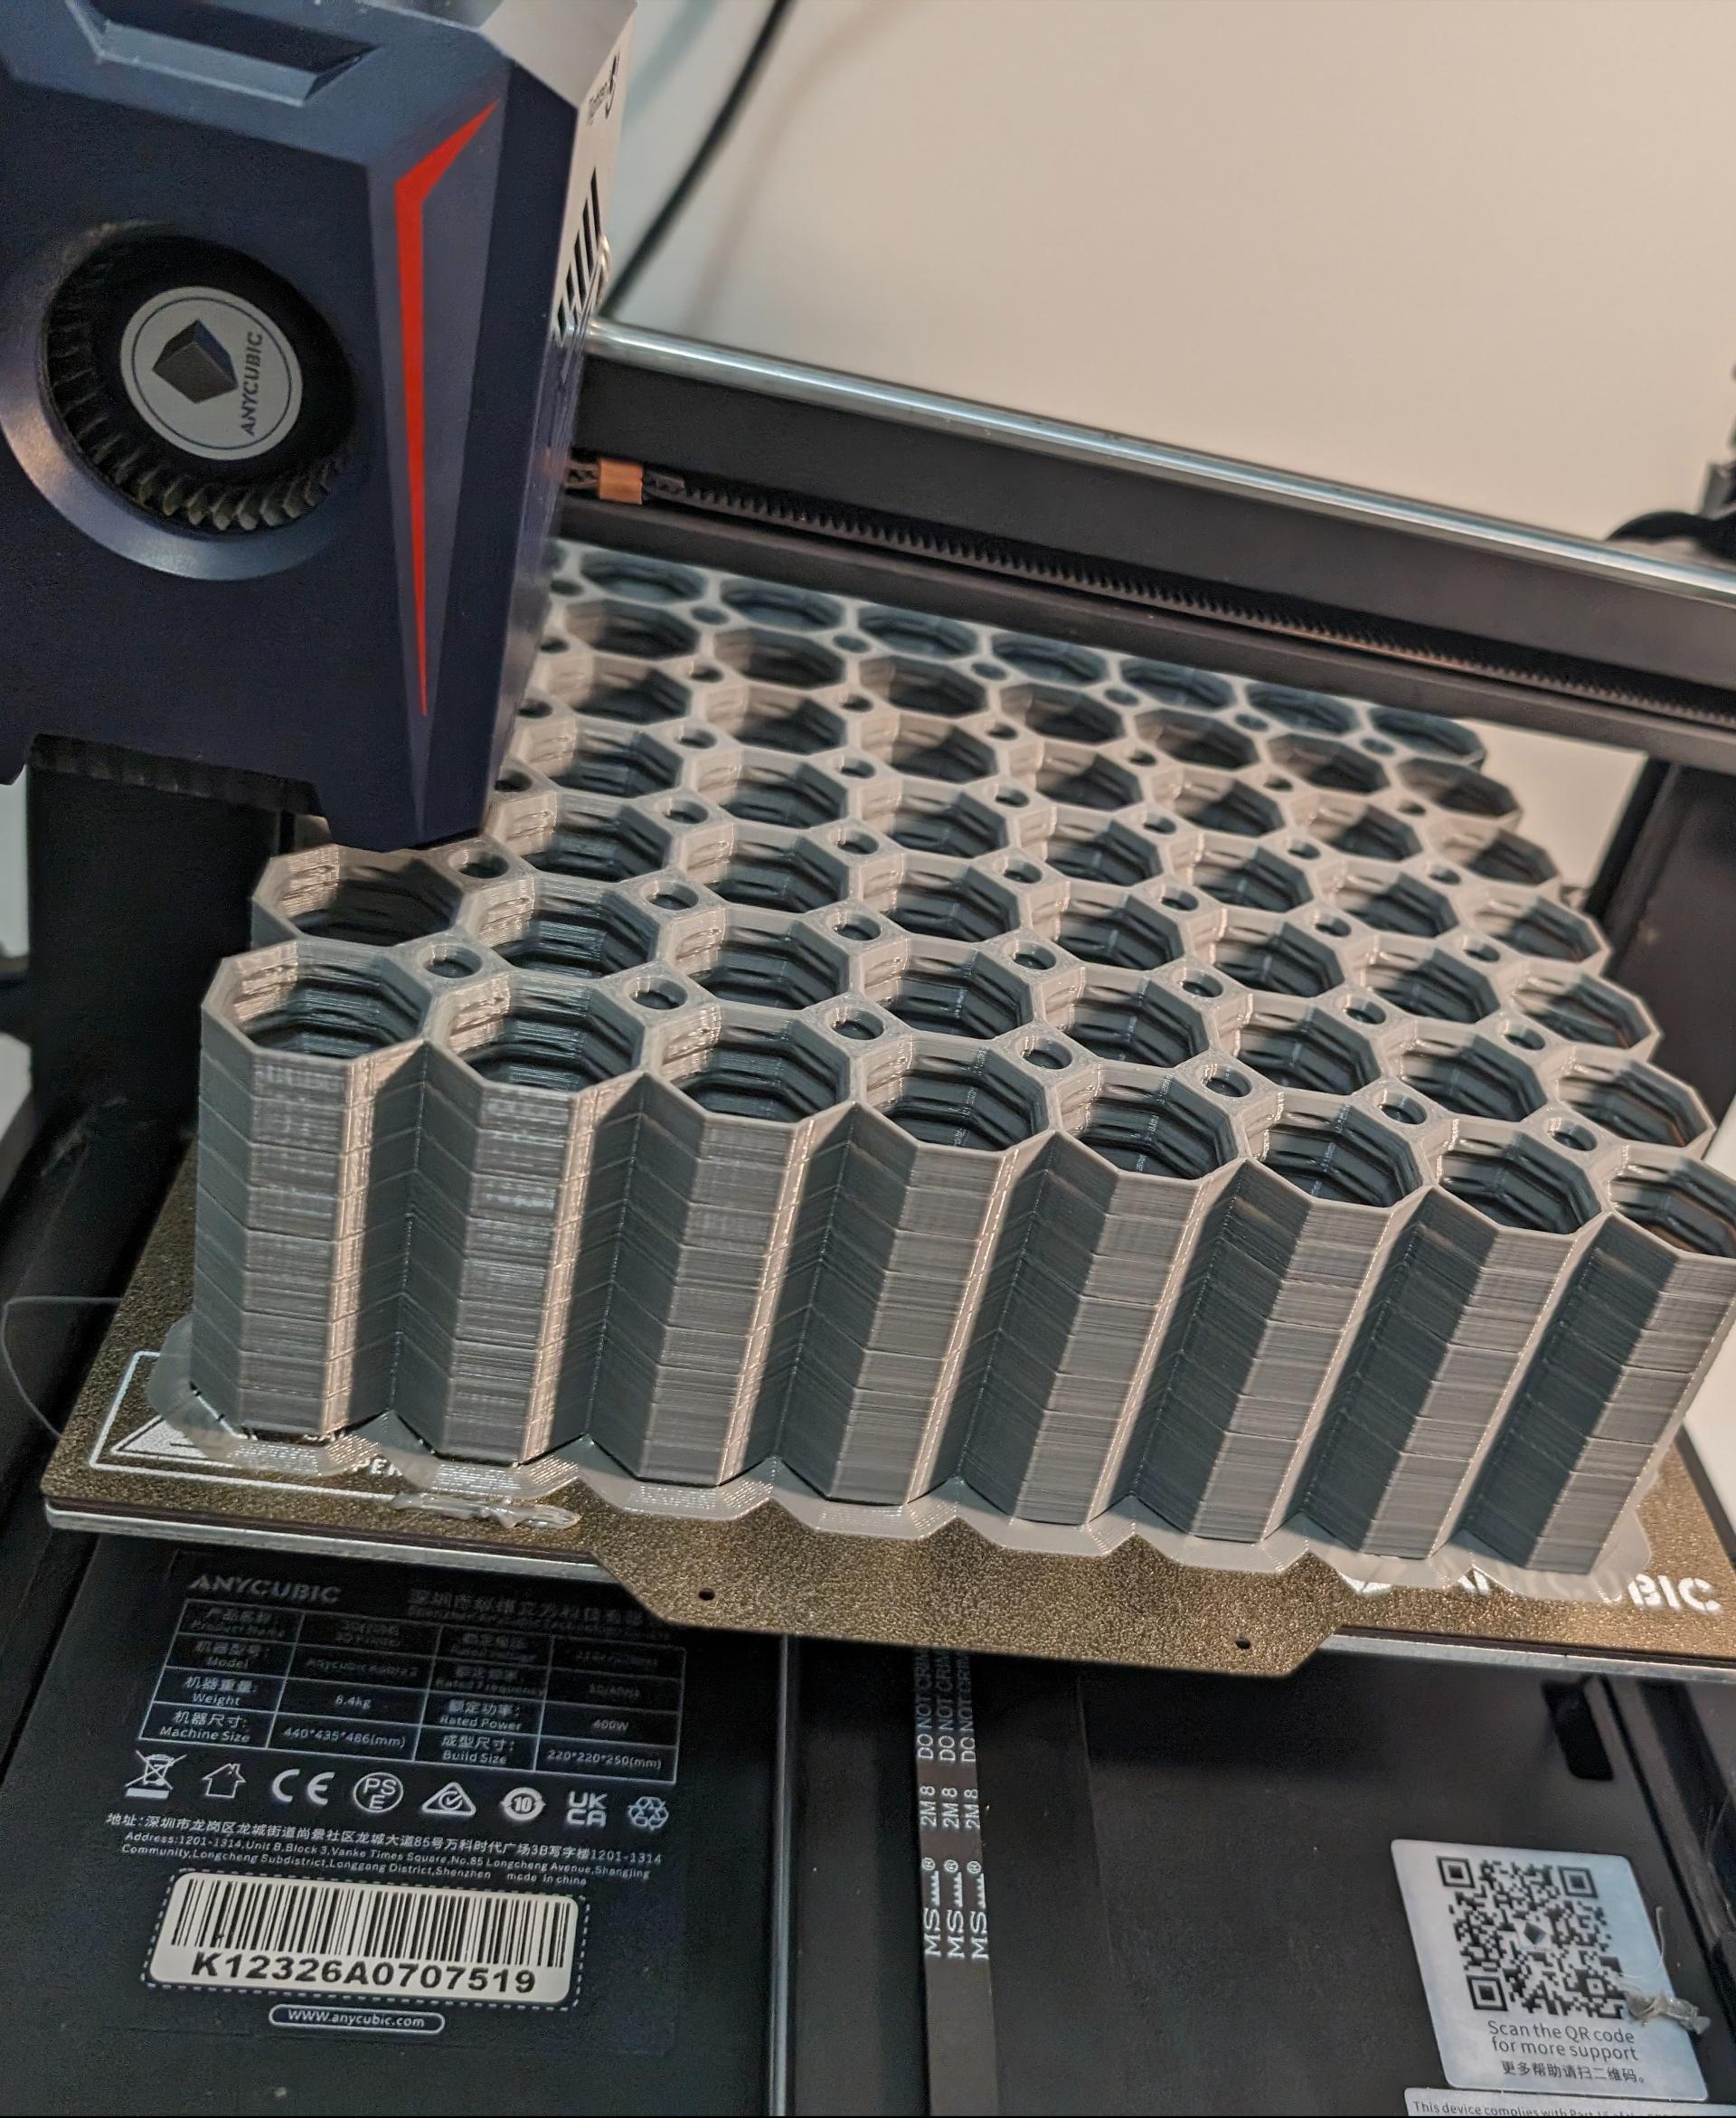 8x8 Multiboard Starter Stack - 37 hours
Anycubic Kobra 2
Anycubic PLA+
215.73m  filament used - about 80% of my spool

- used a brim as my first few test prints had issues adhering to print bed. Even though towards the end, it separated

removed them with a putty knife - 3d model